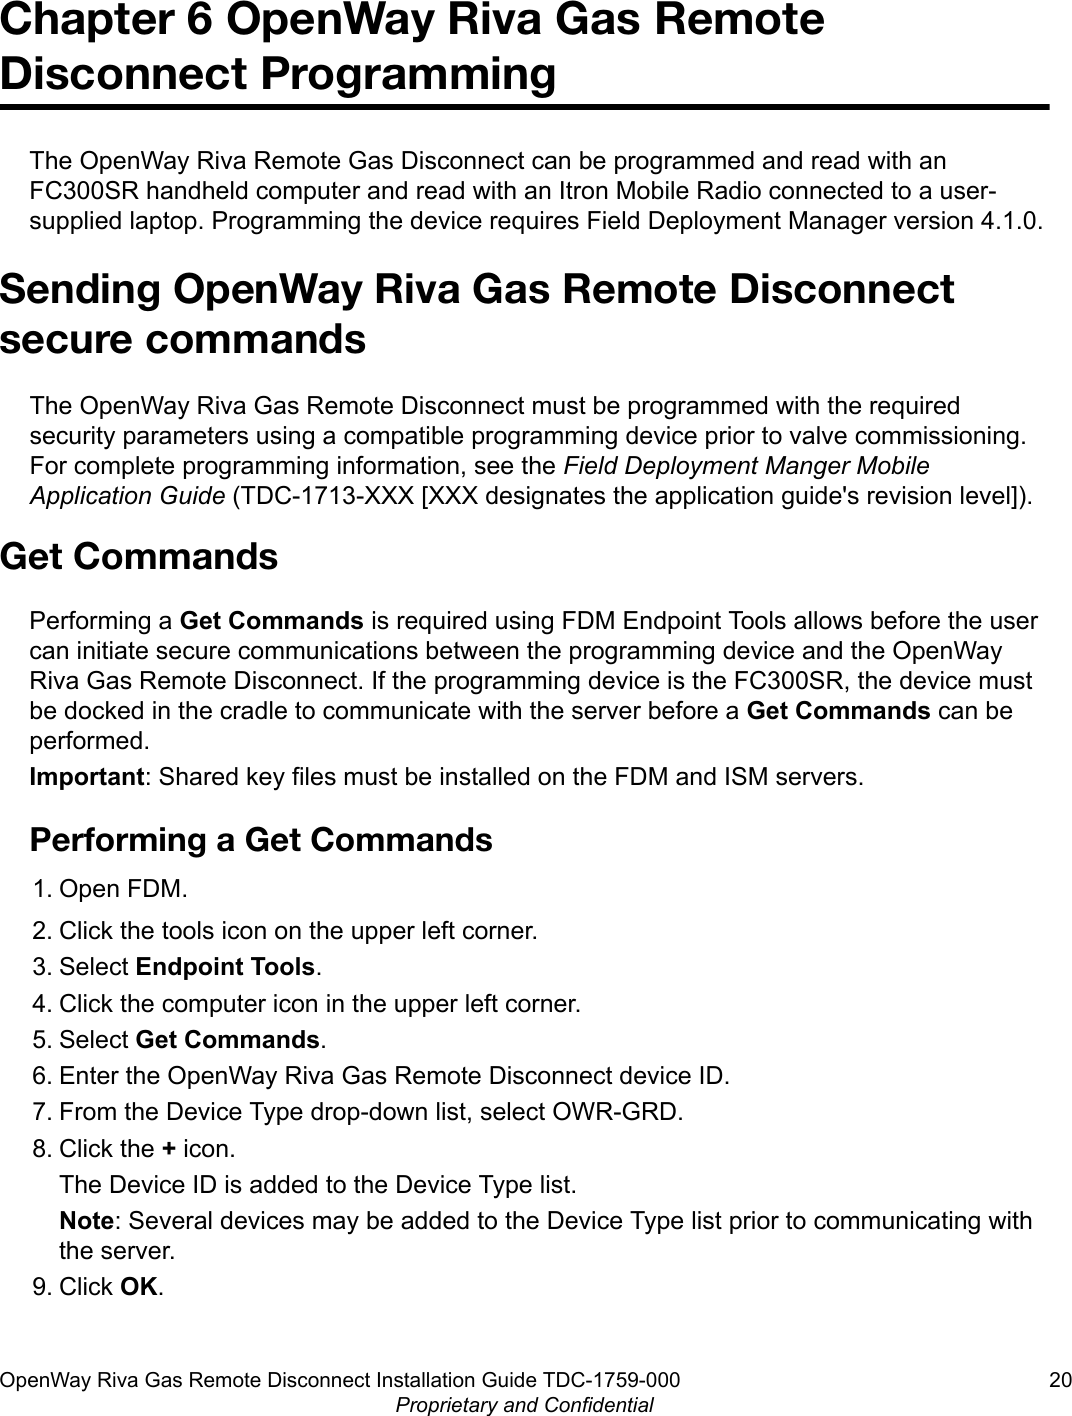 Chapter 6 OpenWay Riva Gas RemoteDisconnect ProgrammingThe OpenWay Riva Remote Gas Disconnect can be programmed and read with anFC300SR handheld computer and read with an Itron Mobile Radio connected to a user-supplied laptop. Programming the device requires Field Deployment Manager version 4.1.0.Sending OpenWay Riva Gas Remote Disconnectsecure commandsThe OpenWay Riva Gas Remote Disconnect must be programmed with the requiredsecurity parameters using a compatible programming device prior to valve commissioning.For complete programming information, see the Field Deployment Manger MobileApplication Guide (TDC-1713-XXX [XXX designates the application guide&apos;s revision level]).Get CommandsPerforming a Get Commands is required using FDM Endpoint Tools allows before the usercan initiate secure communications between the programming device and the OpenWayRiva Gas Remote Disconnect. If the programming device is the FC300SR, the device mustbe docked in the cradle to communicate with the server before a Get Commands can beperformed.Important: Shared key files must be installed on the FDM and ISM servers.Performing a Get Commands1. Open FDM.2. Click the tools icon on the upper left corner.3. Select Endpoint Tools.4. Click the computer icon in the upper left corner.5. Select Get Commands.6. Enter the OpenWay Riva Gas Remote Disconnect device ID.7. From the Device Type drop-down list, select OWR-GRD.8. Click the + icon.The Device ID is added to the Device Type list.Note: Several devices may be added to the Device Type list prior to communicating withthe server.9. Click OK.OpenWay Riva Gas Remote Disconnect Installation Guide TDC-1759-000 20Proprietary and Confidential